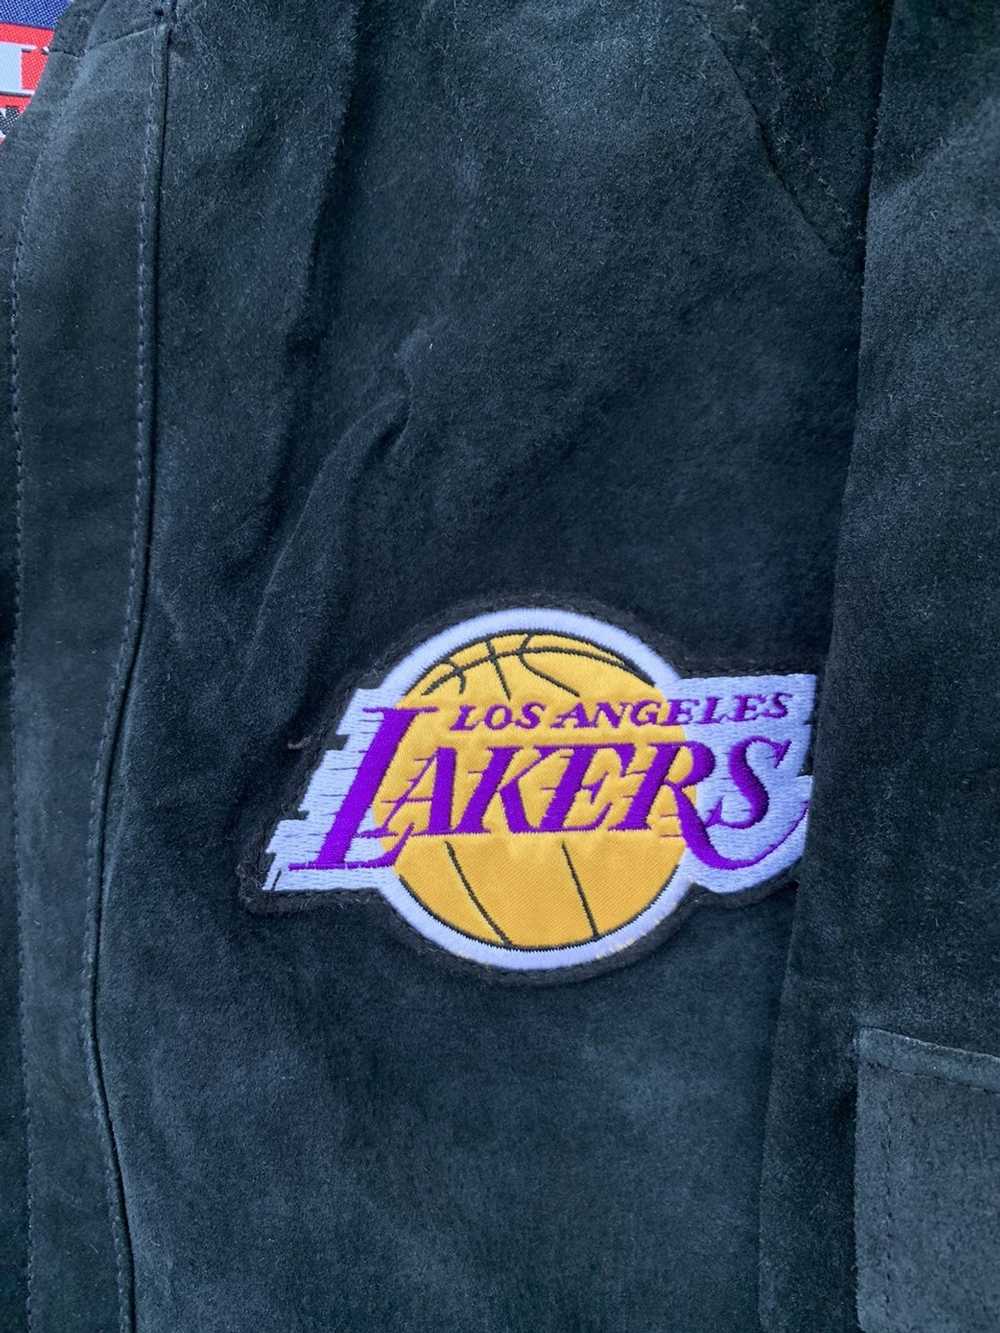 Lakers × NBA × Vintage Lakers Leather Coat - image 2